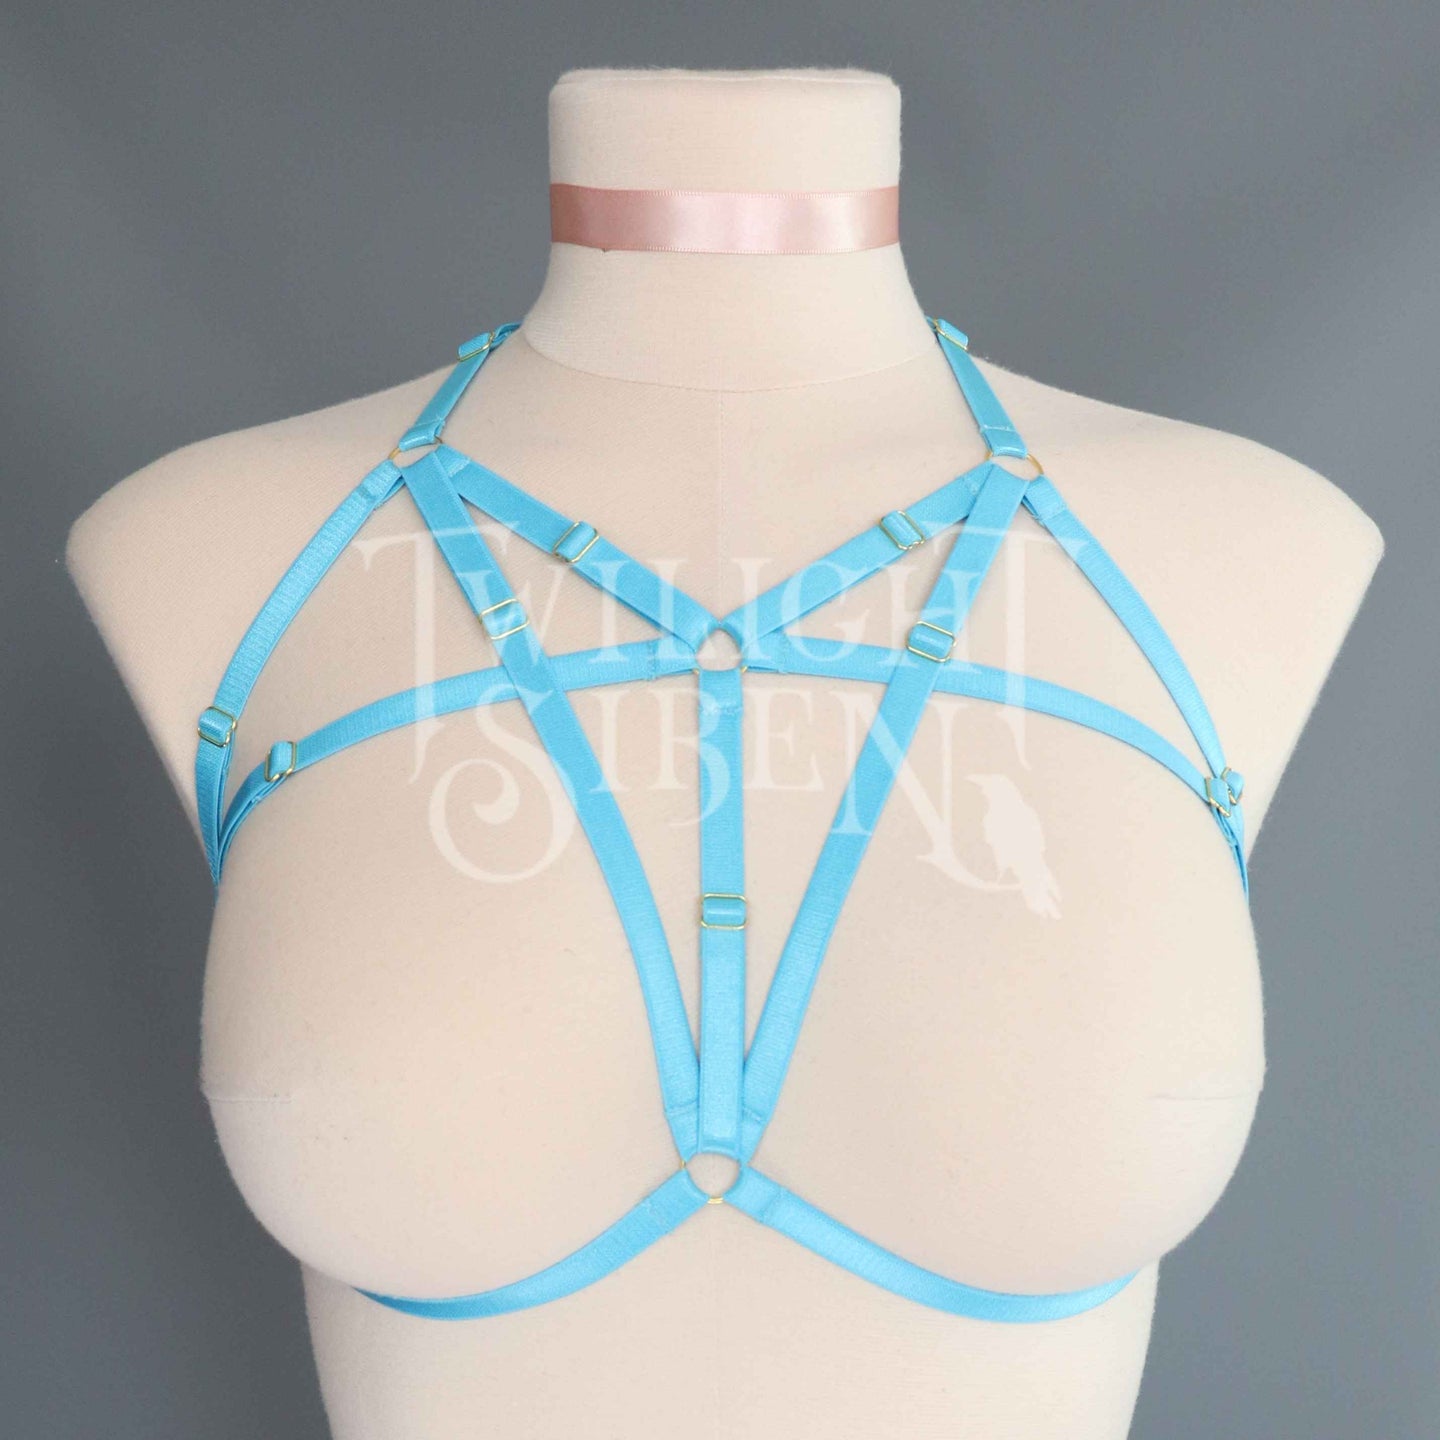 TALIA BODY HARNESS BRALET TEAL TURQUOISE BLUE / GOLD - SIZE // SMALL UK 8-10 // US 4-6